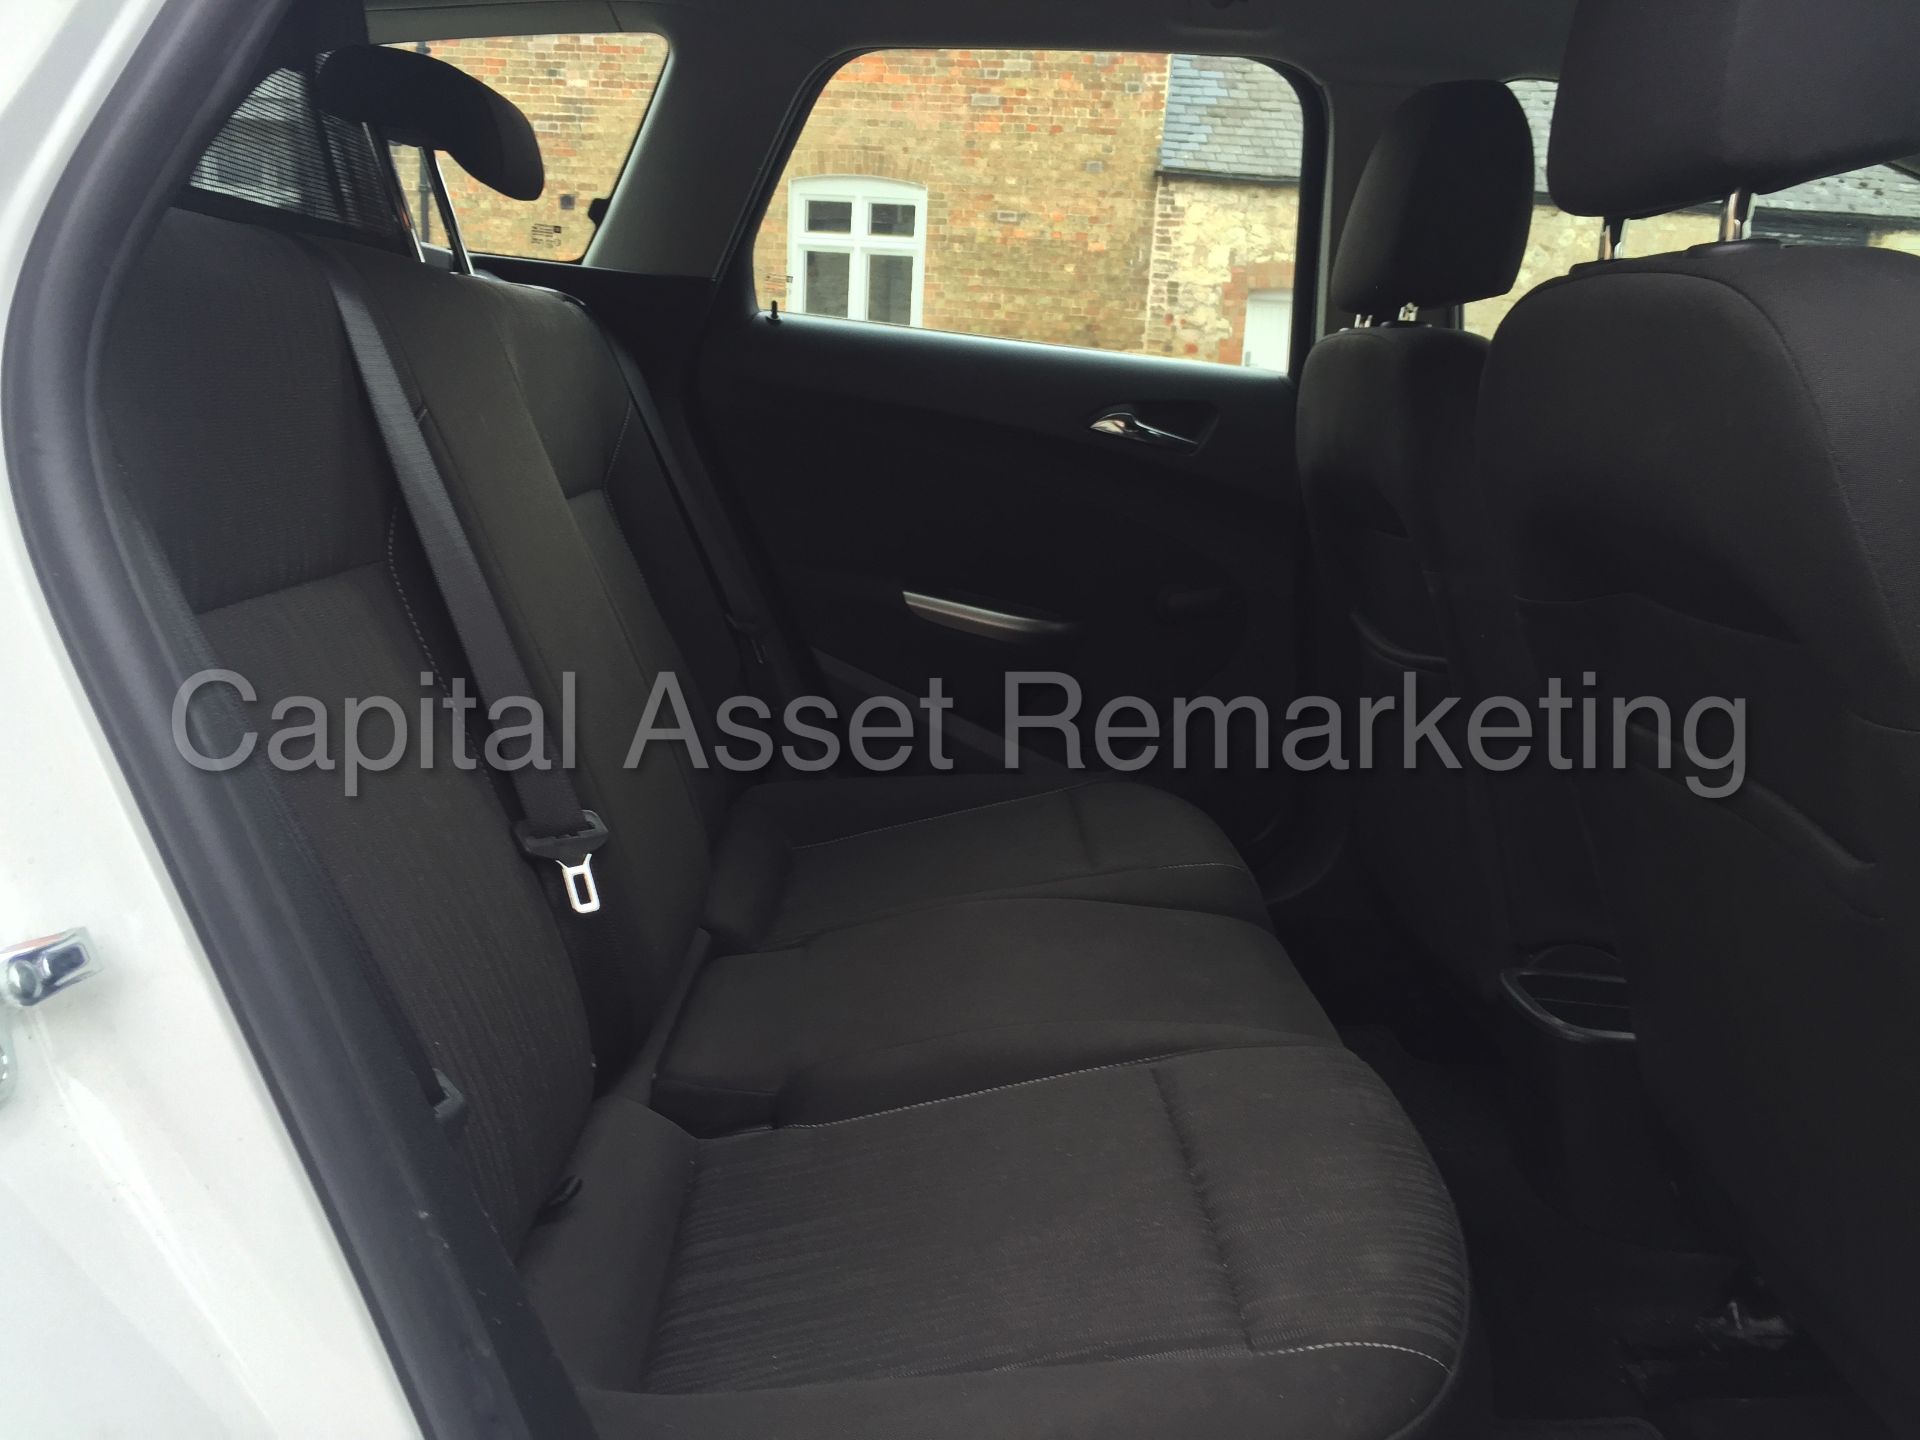 VAUXHALL ASTRA 'EXCLUSIVE' (2012 MODEL) '1.7 CDTI - ECOFLEX - 6 SPEED' *AIR CON* NO VAT - Image 19 of 24